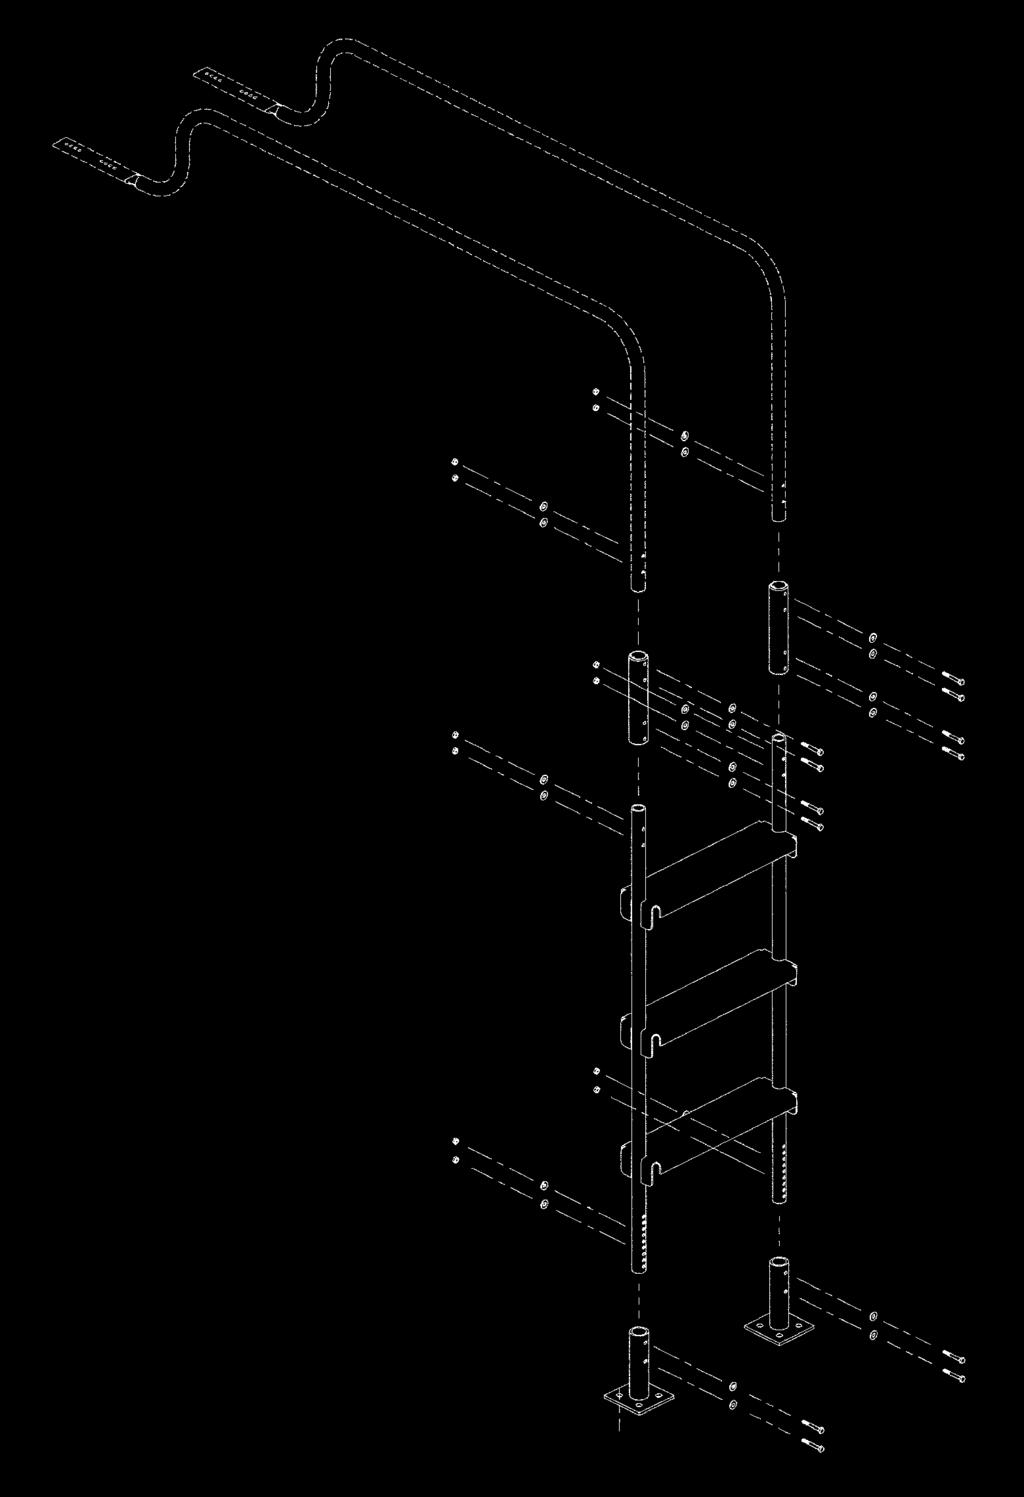 The ladder mounts to the floor and to the pinspotter, and the steps mount to the pinspotters between pinspotter pairs (for example, between pinspotters 2 and 3, 4 and 5, etc.).